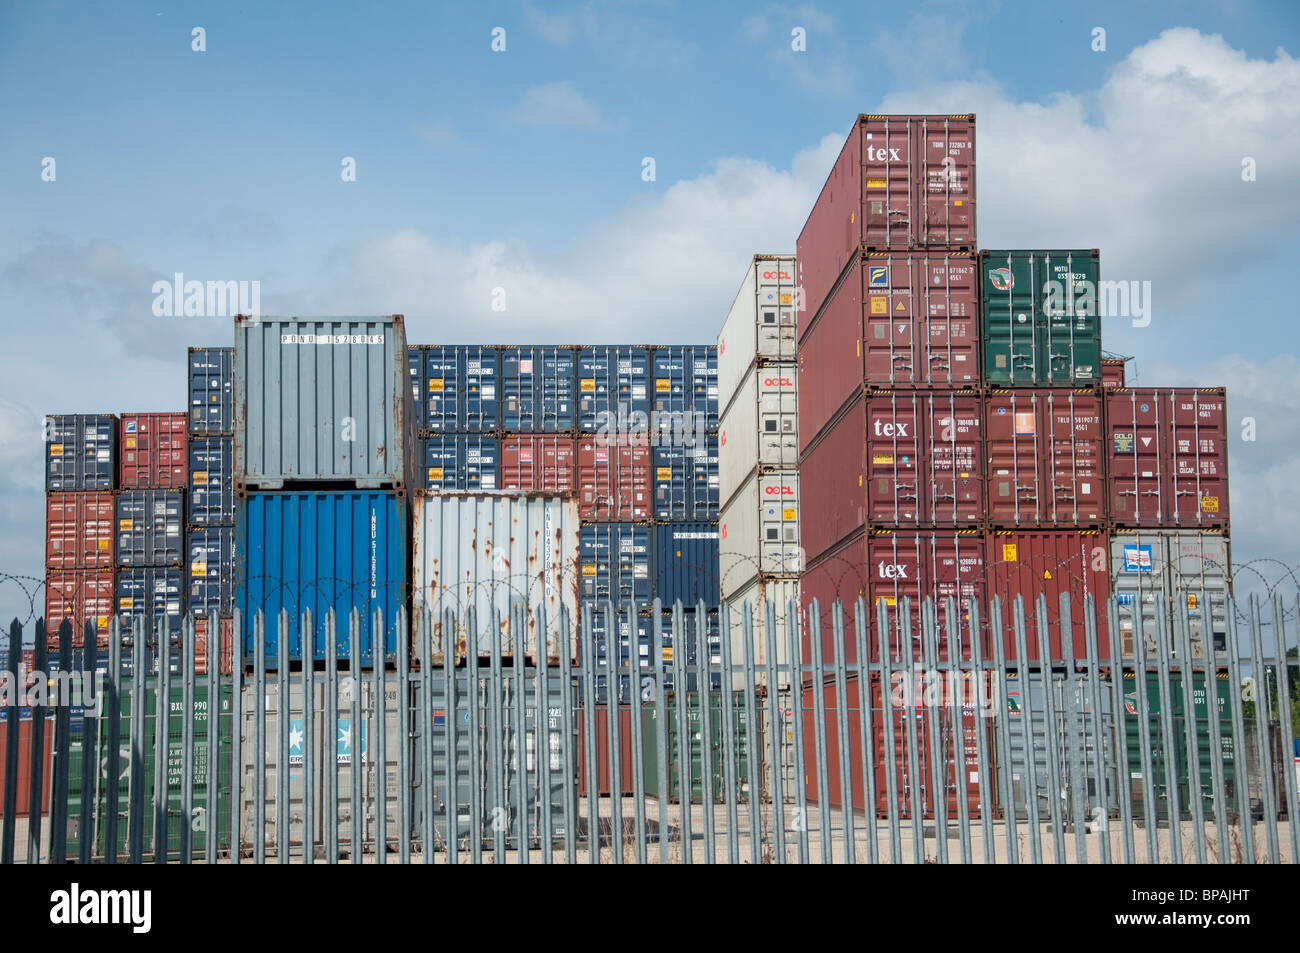 Shipping containers stacked up at Southampton docks in Southampton, England. Stock Photo